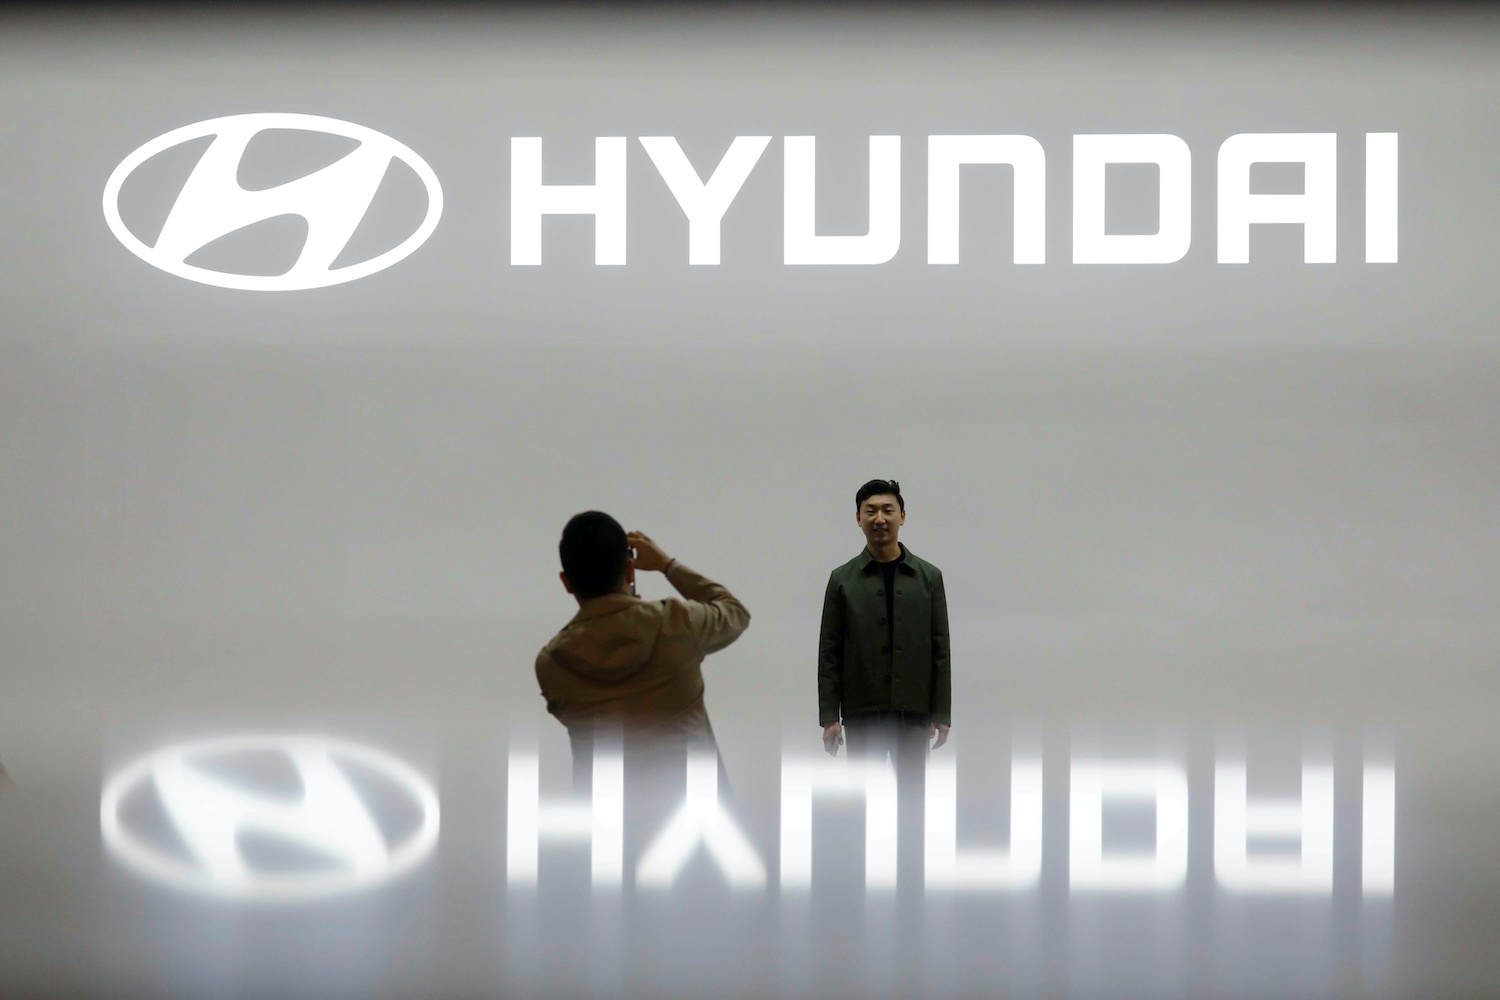 Exploding Part Prompts Recall of 281,000 Hyundai Vehicles